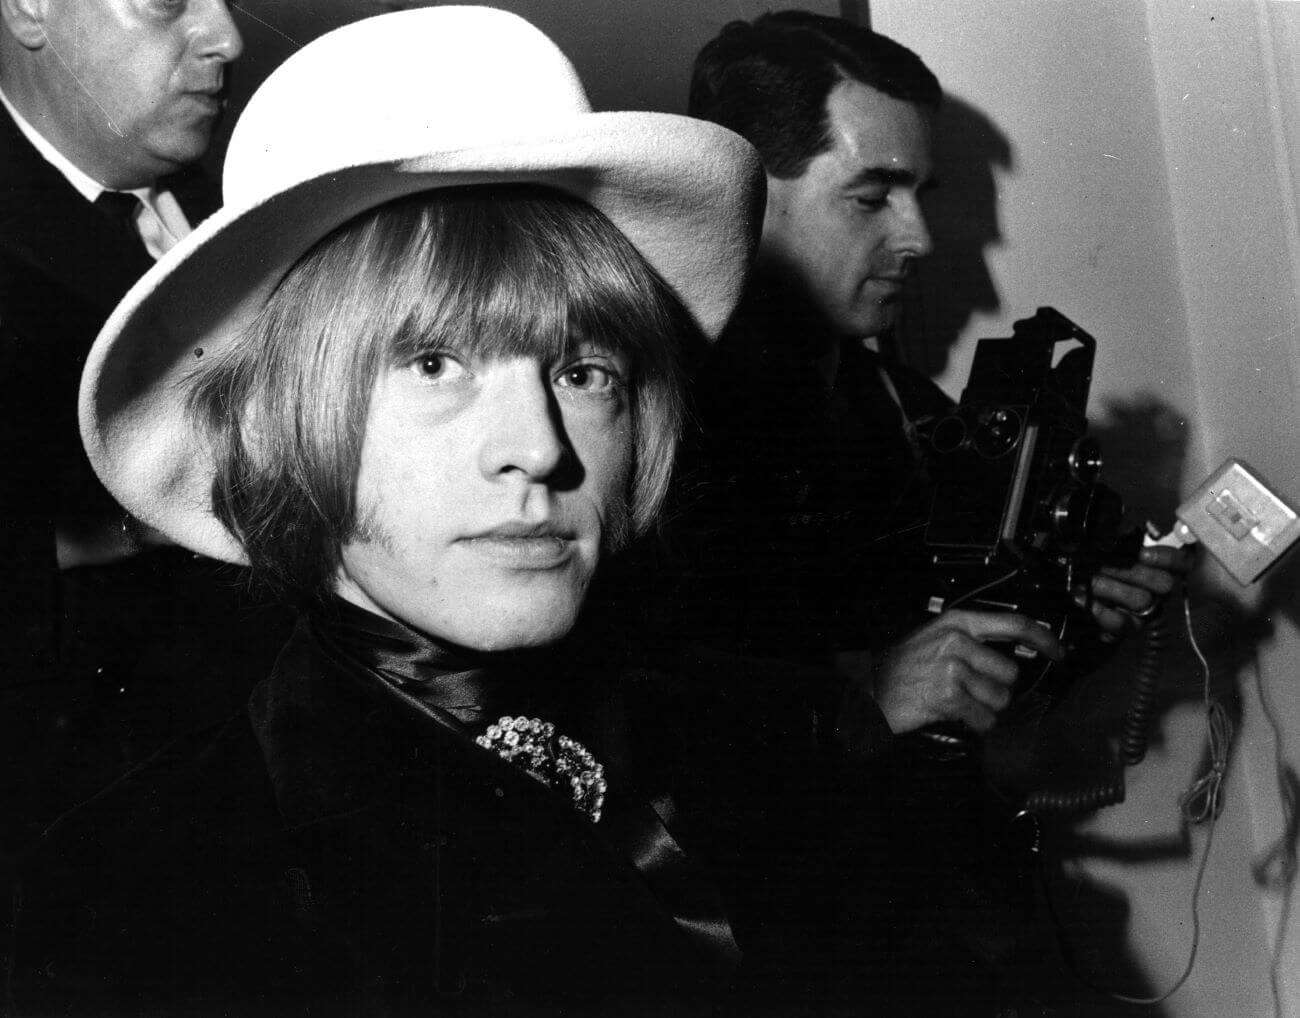 A black and white picture of Brian Jones wearing a hat in front of photographers.